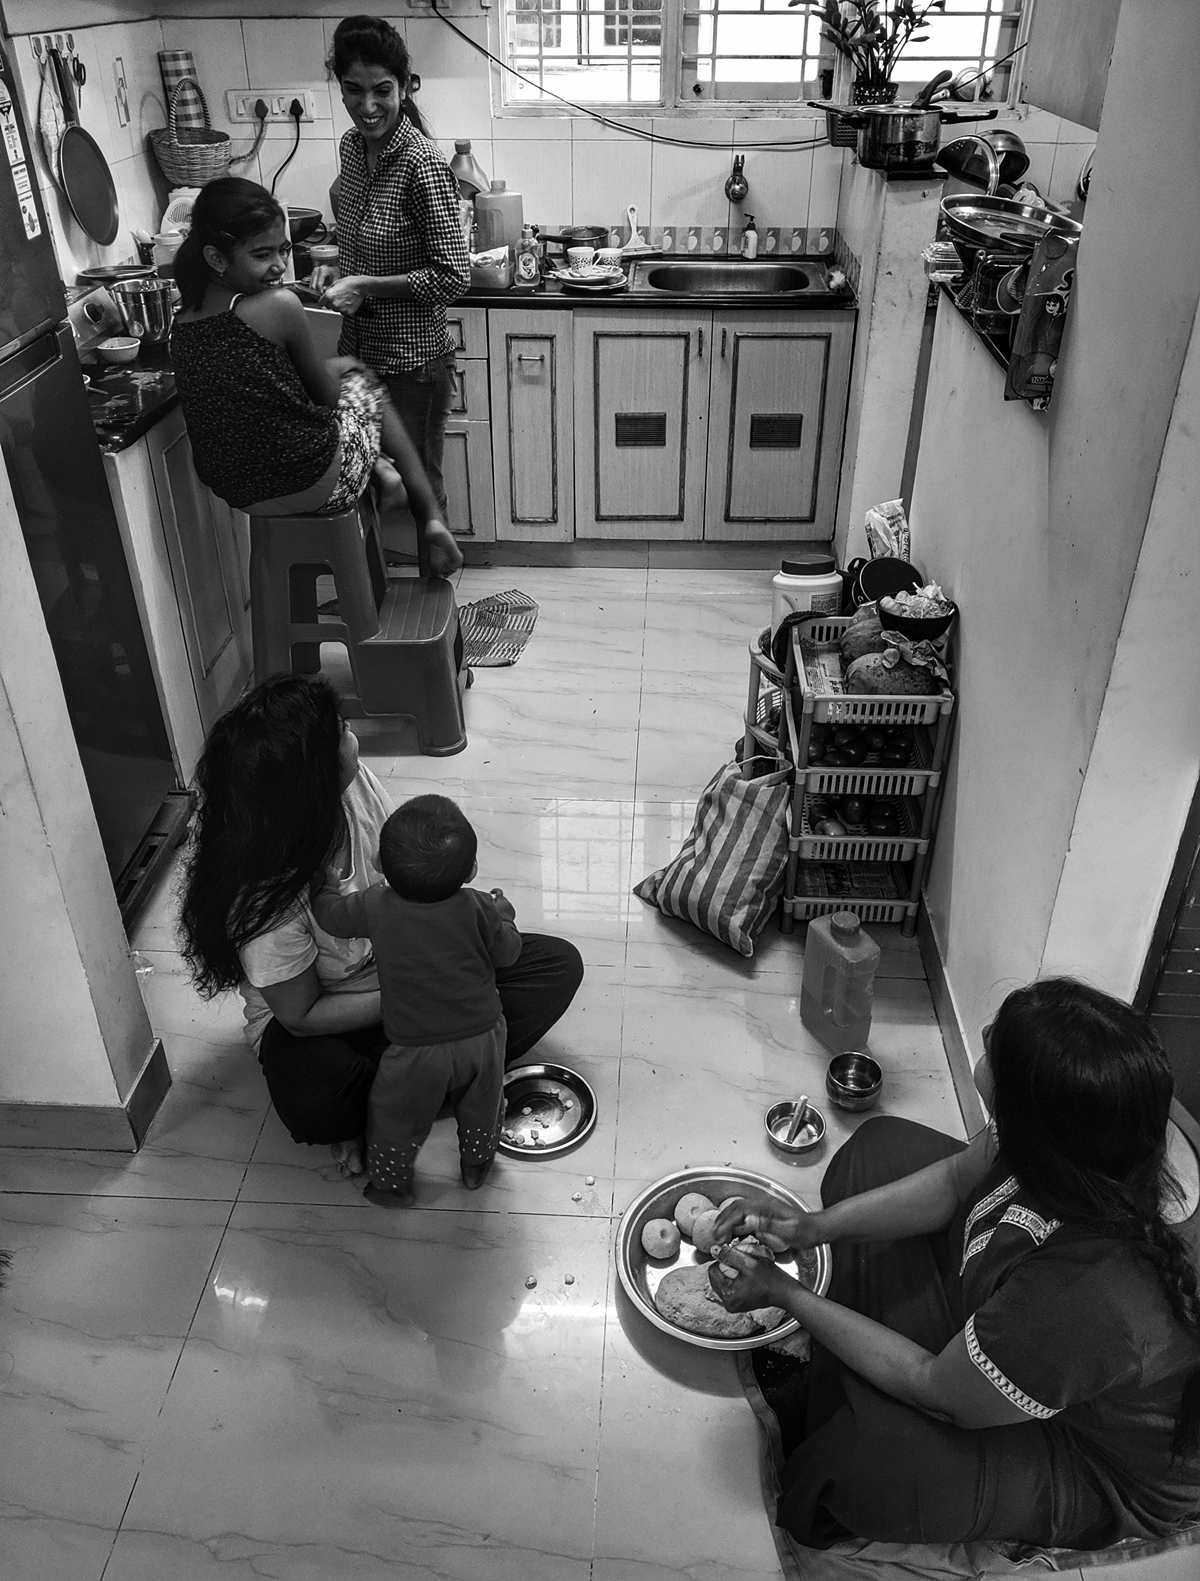 Women at Leisure: Girls and women in a family gathered in the kitchen to talk and also prepare an elaborate meal for rest of the family during a family reunion.